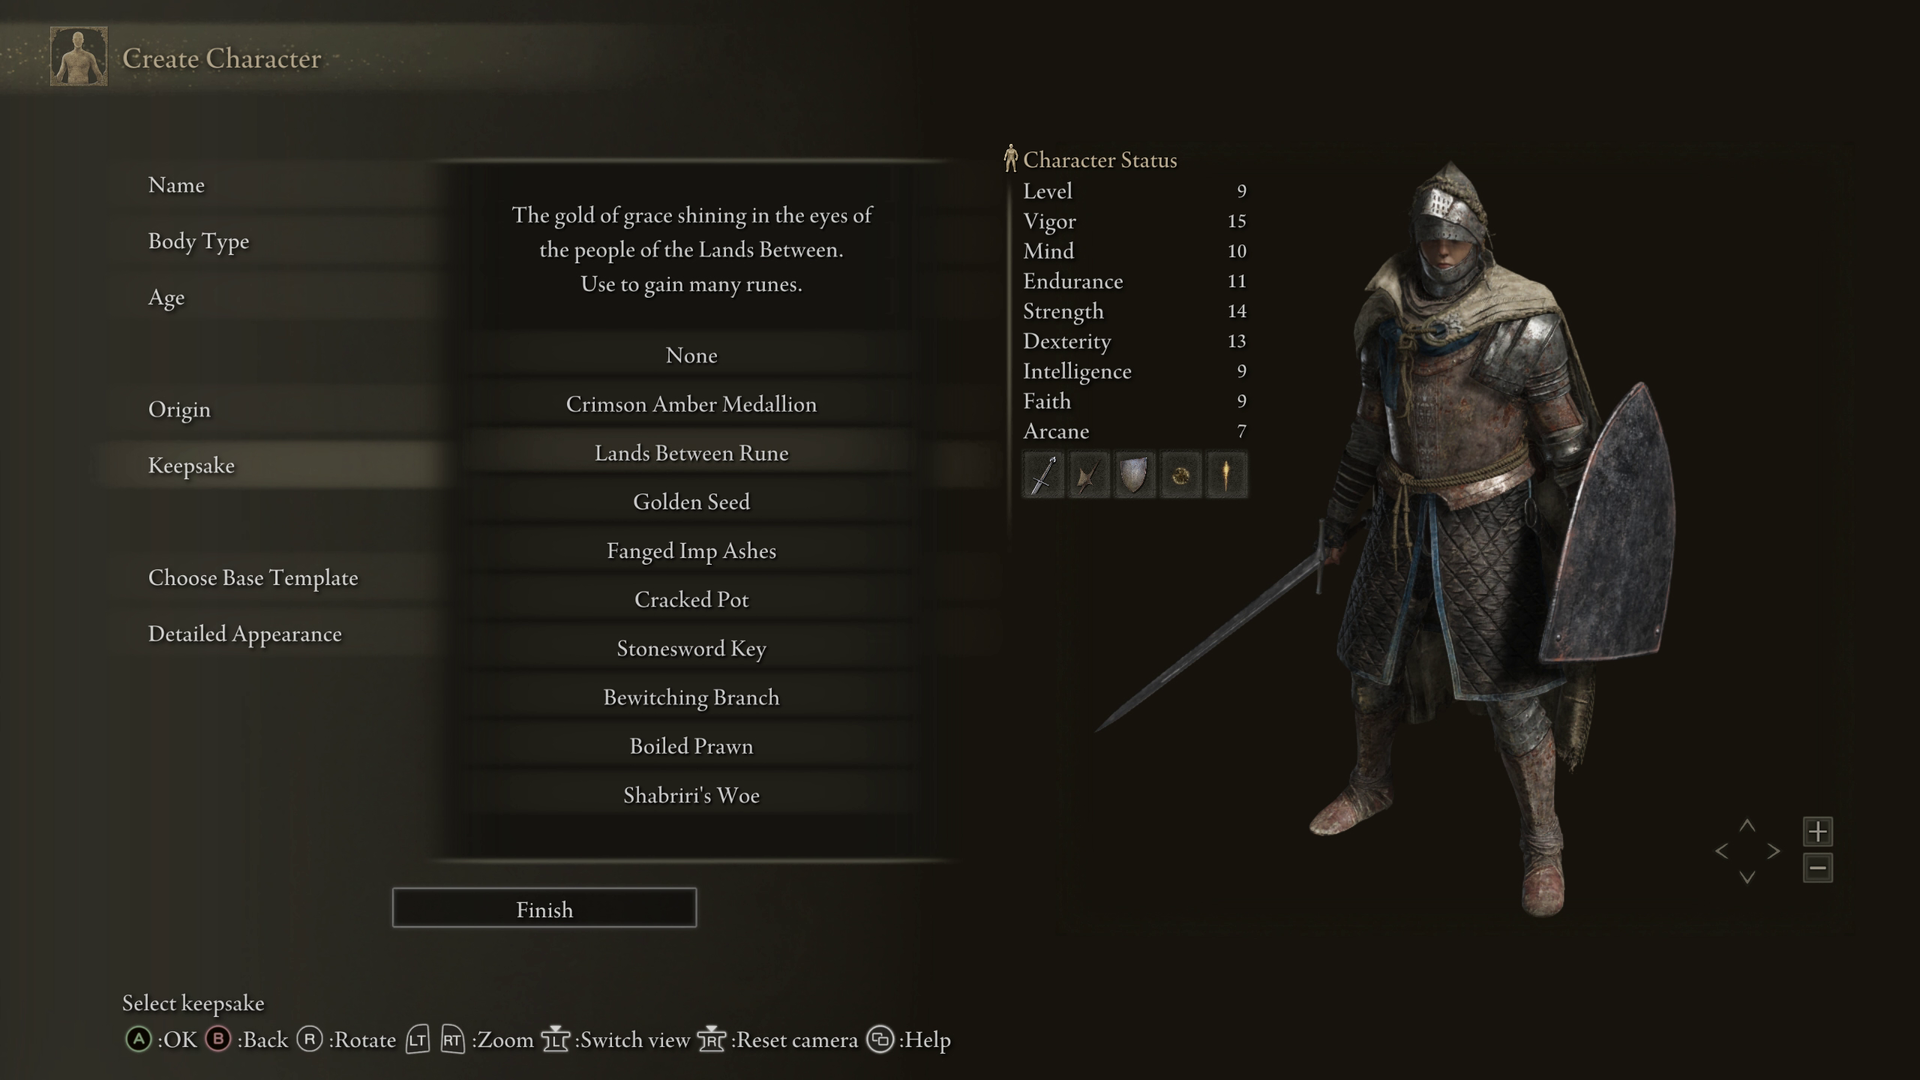 Image for What’s the best Keepsake to choose in Elden Ring character creation?